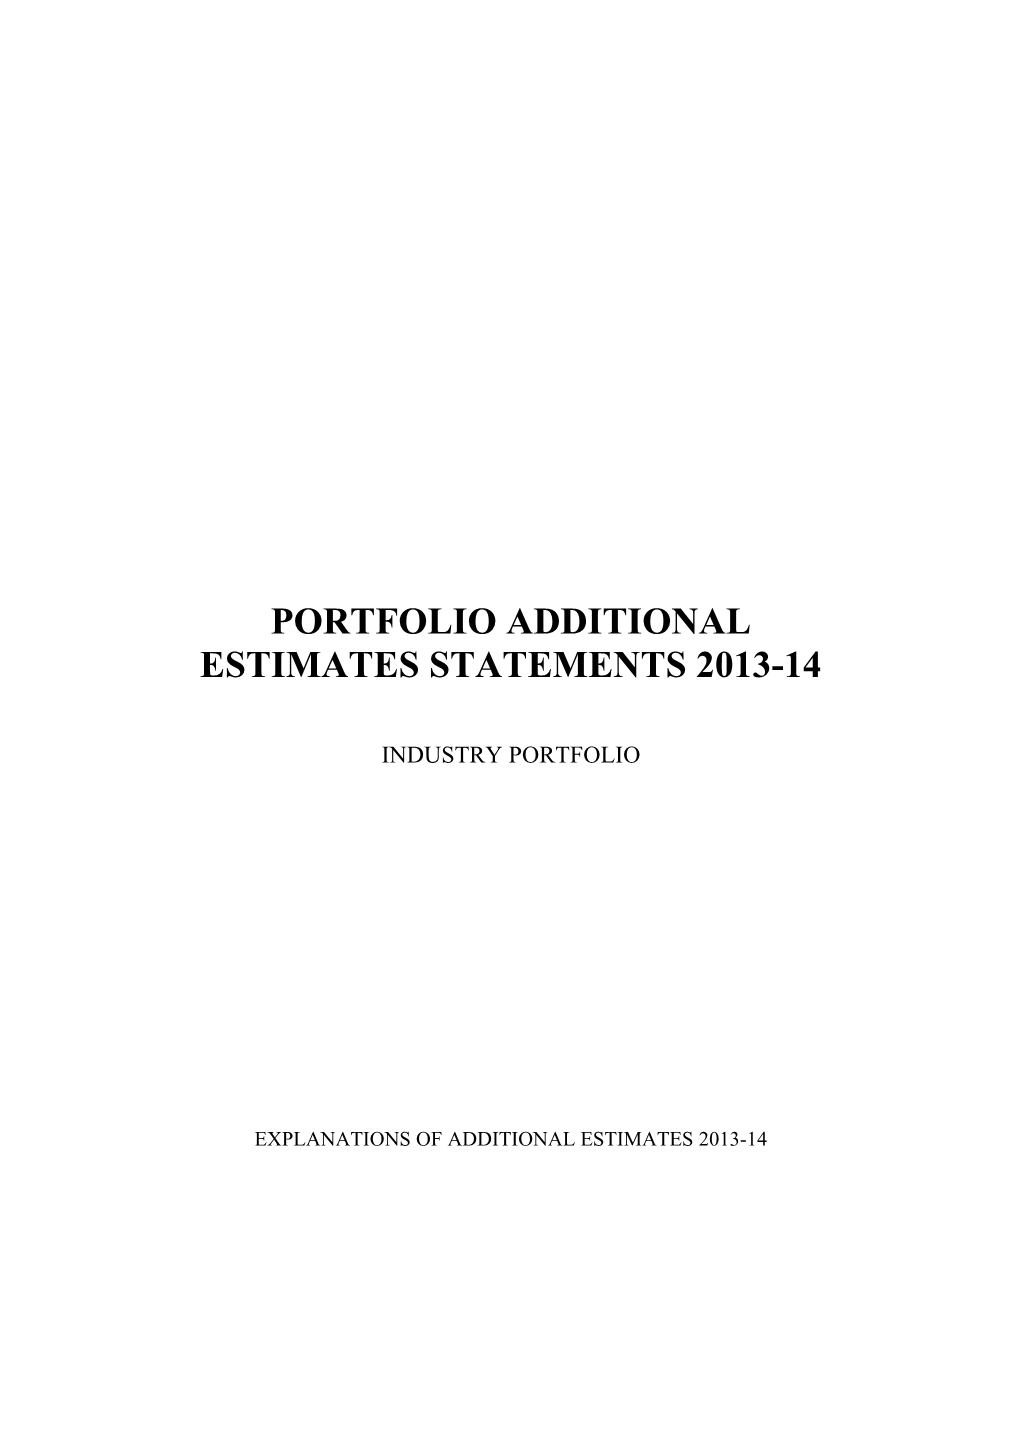 Part C: Agency Additional Estimates Statements Agency Name